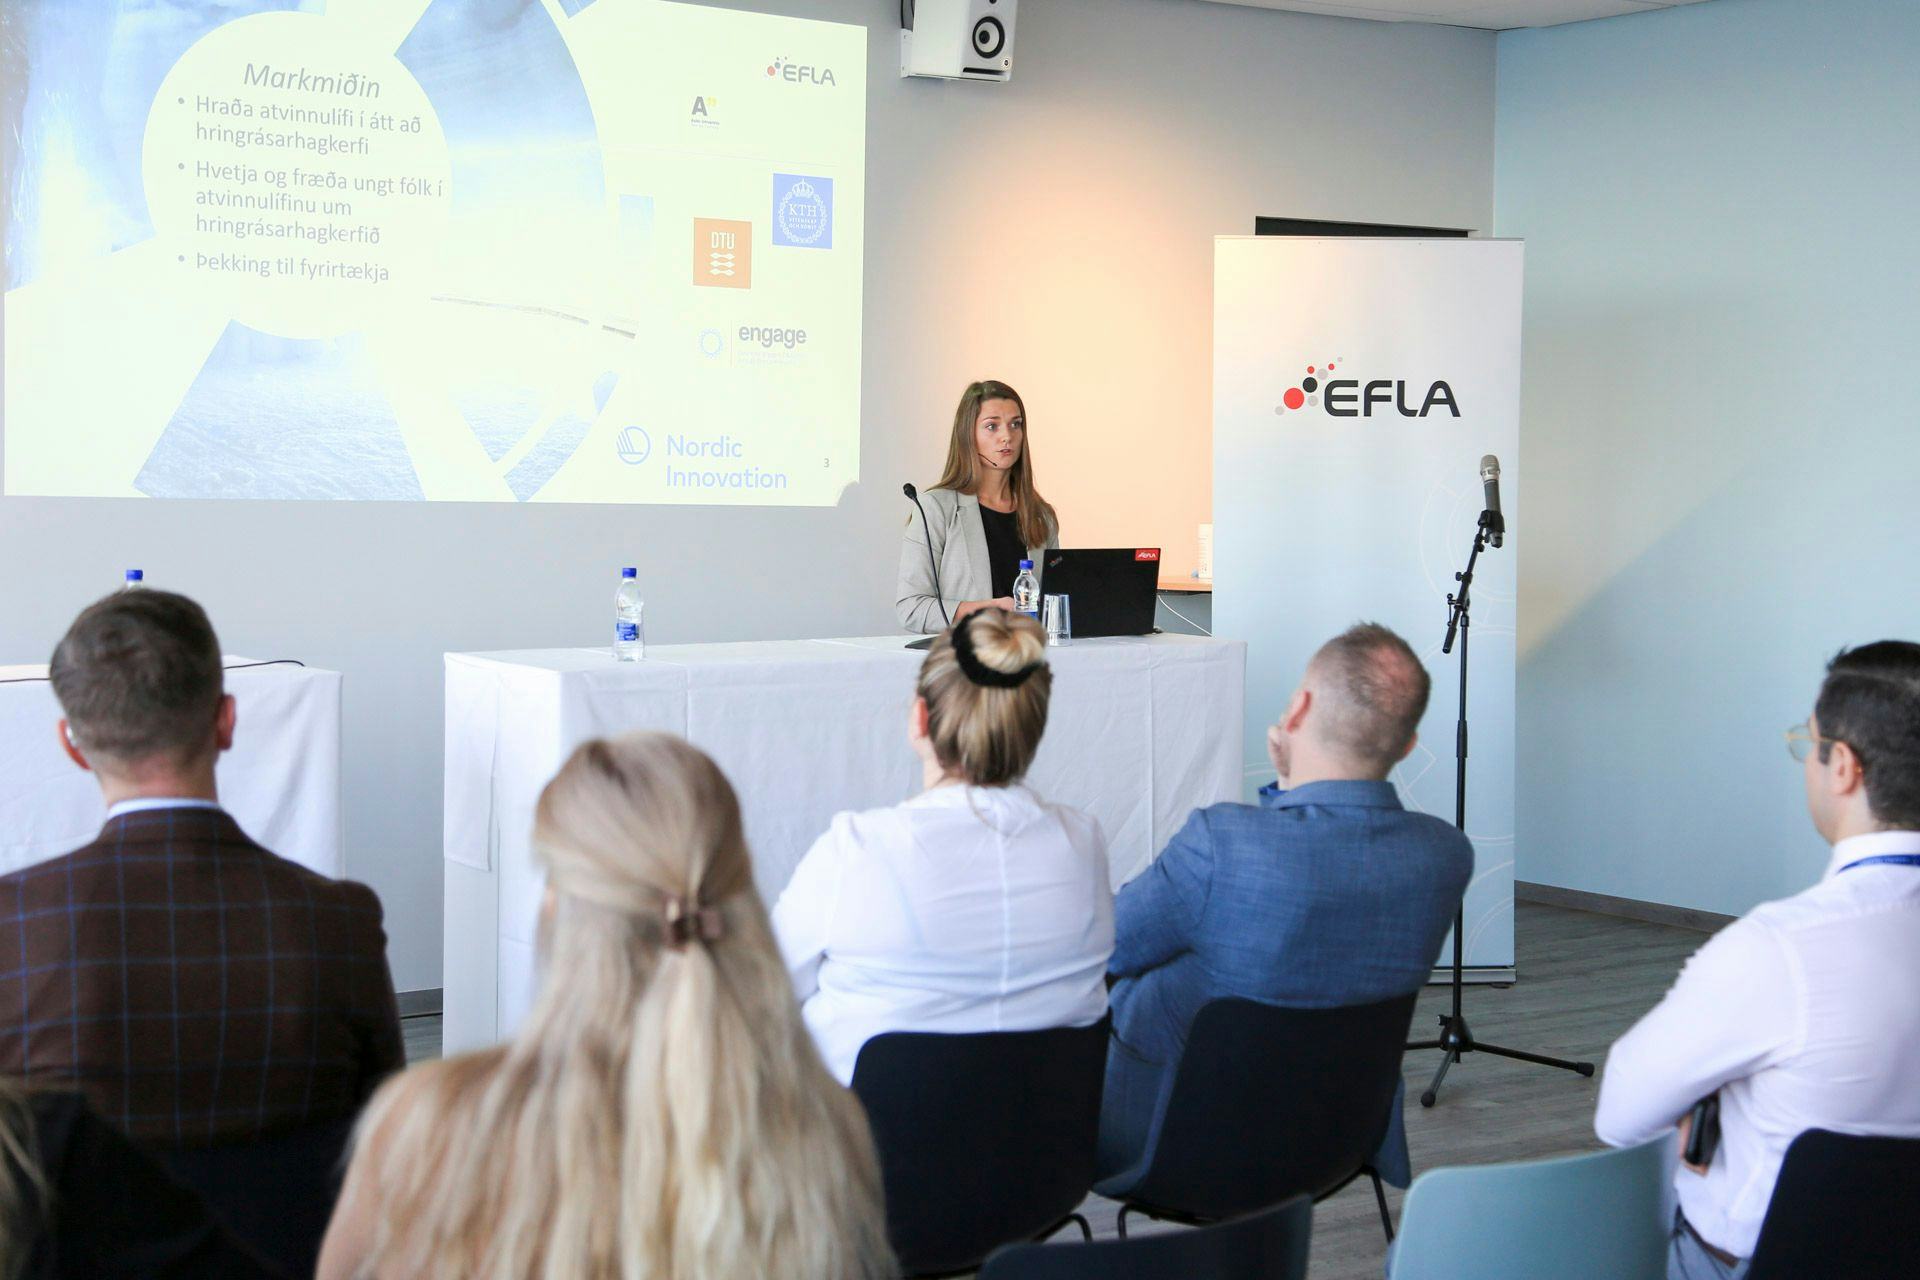 An audience listening to a speaker seated with a laptop at a conference or presentation with the "EFLA" banner close to her